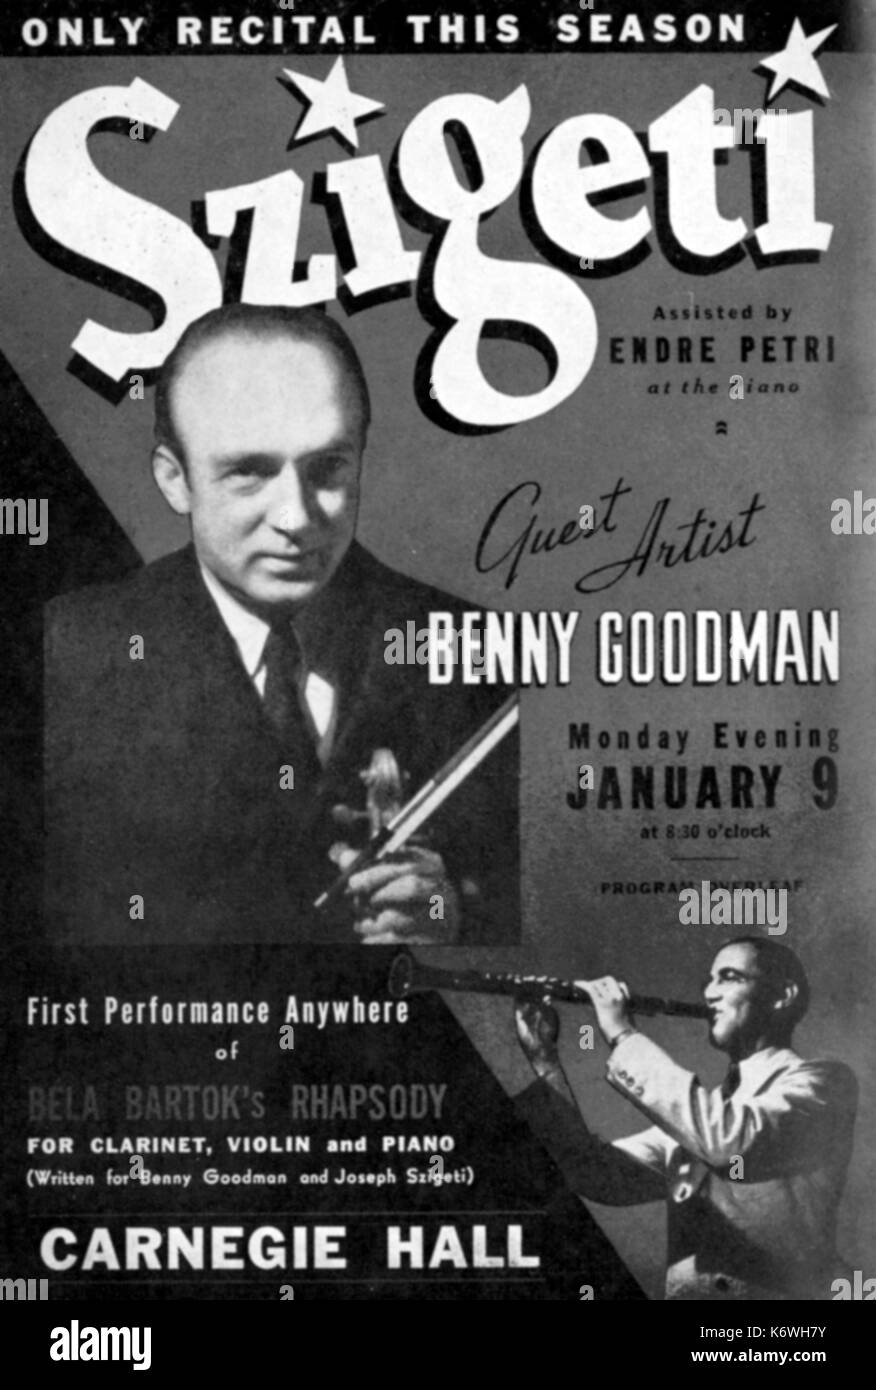 Joseph Szigeti  performing BARTOK 's - 'RHAPSODY' (later called Contrasts) with Benny Goodman. Concert Poster announcing performance, 9 January 1939,   at Carnegie Hall Hungarian composer & pianist, 1881-1945 Stock Photo